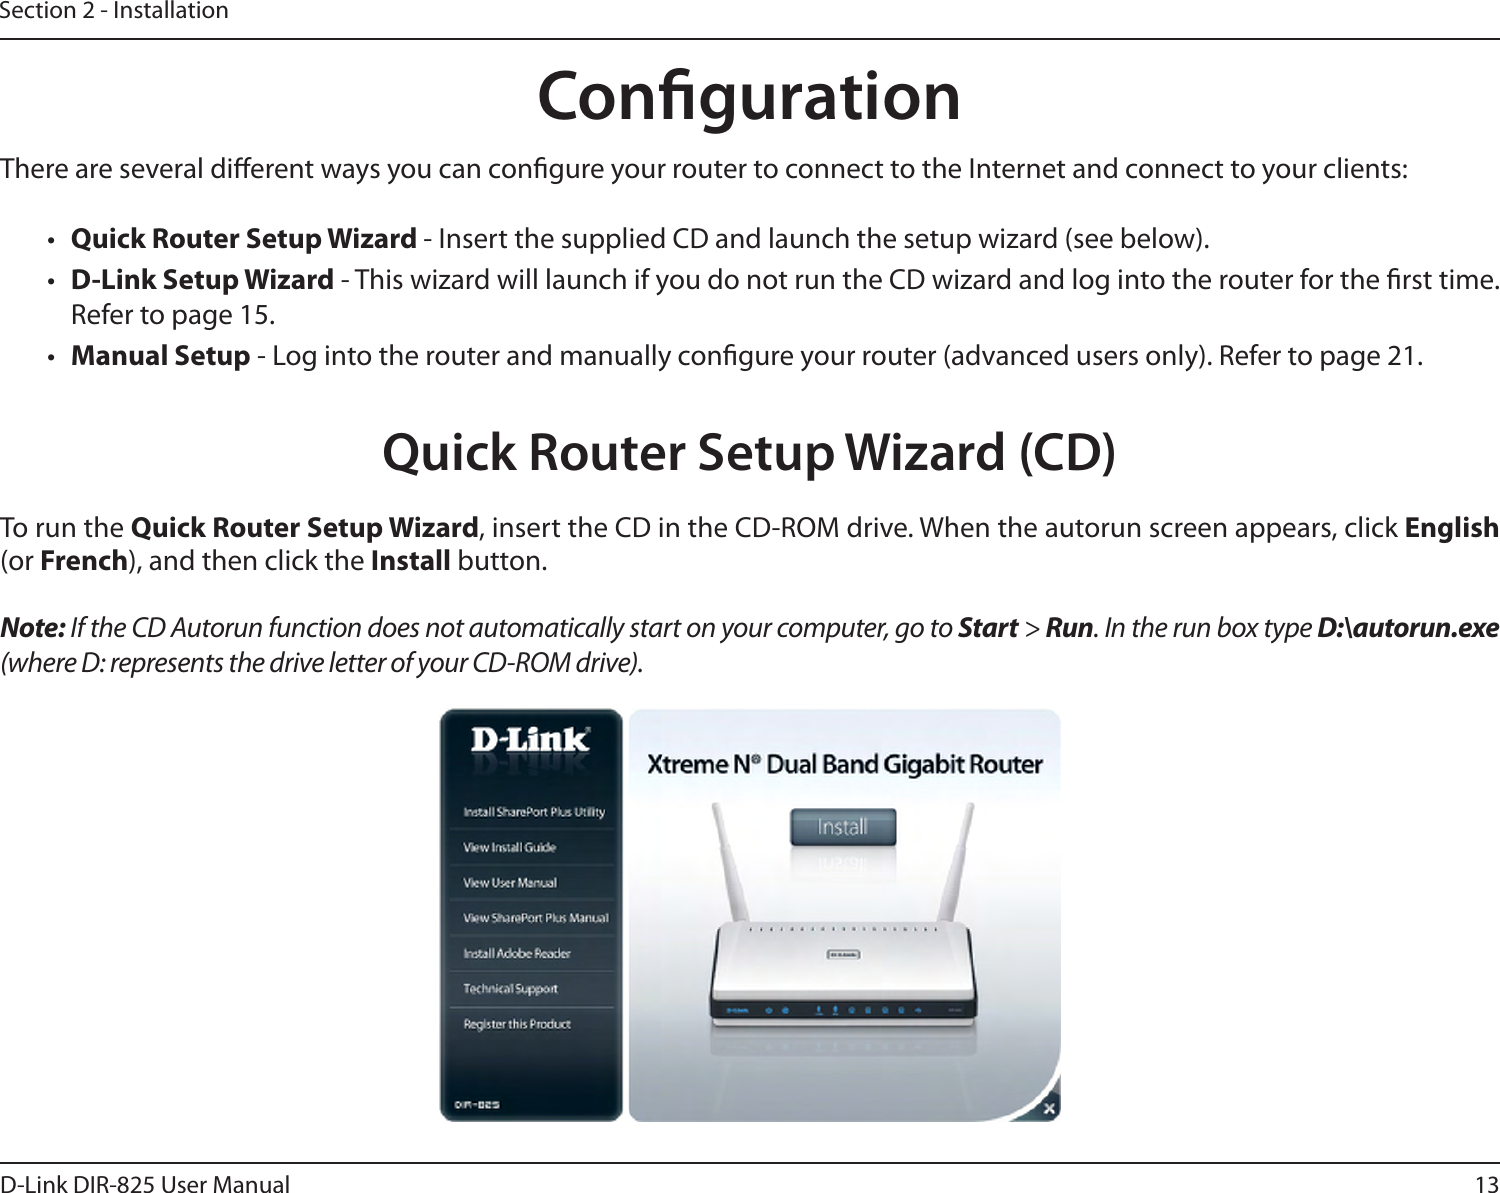 13D-Link DIR-825 User ManualSection 2 - InstallationThere are several dierent ways you can congure your router to connect to the Internet and connect to your clients:•  Quick Router Setup Wizard - Insert the supplied CD and launch the setup wizard (see below).•  D-Link Setup Wizard - This wizard will launch if you do not run the CD wizard and log into the router for the rst time. Refer to page 15.•  Manual Setup - Log into the router and manually congure your router (advanced users only). Refer to page 21.To run the Quick Router Setup Wizard, insert the CD in the CD-ROM drive. When the autorun screen appears, click English (or French), and then click the Install button.Note: If the CD Autorun function does not automatically start on your computer, go to Start &gt; Run. In the run box type D:\autorun.exe (where D: represents the drive letter of your CD-ROM drive).CongurationQuick Router Setup Wizard (CD)